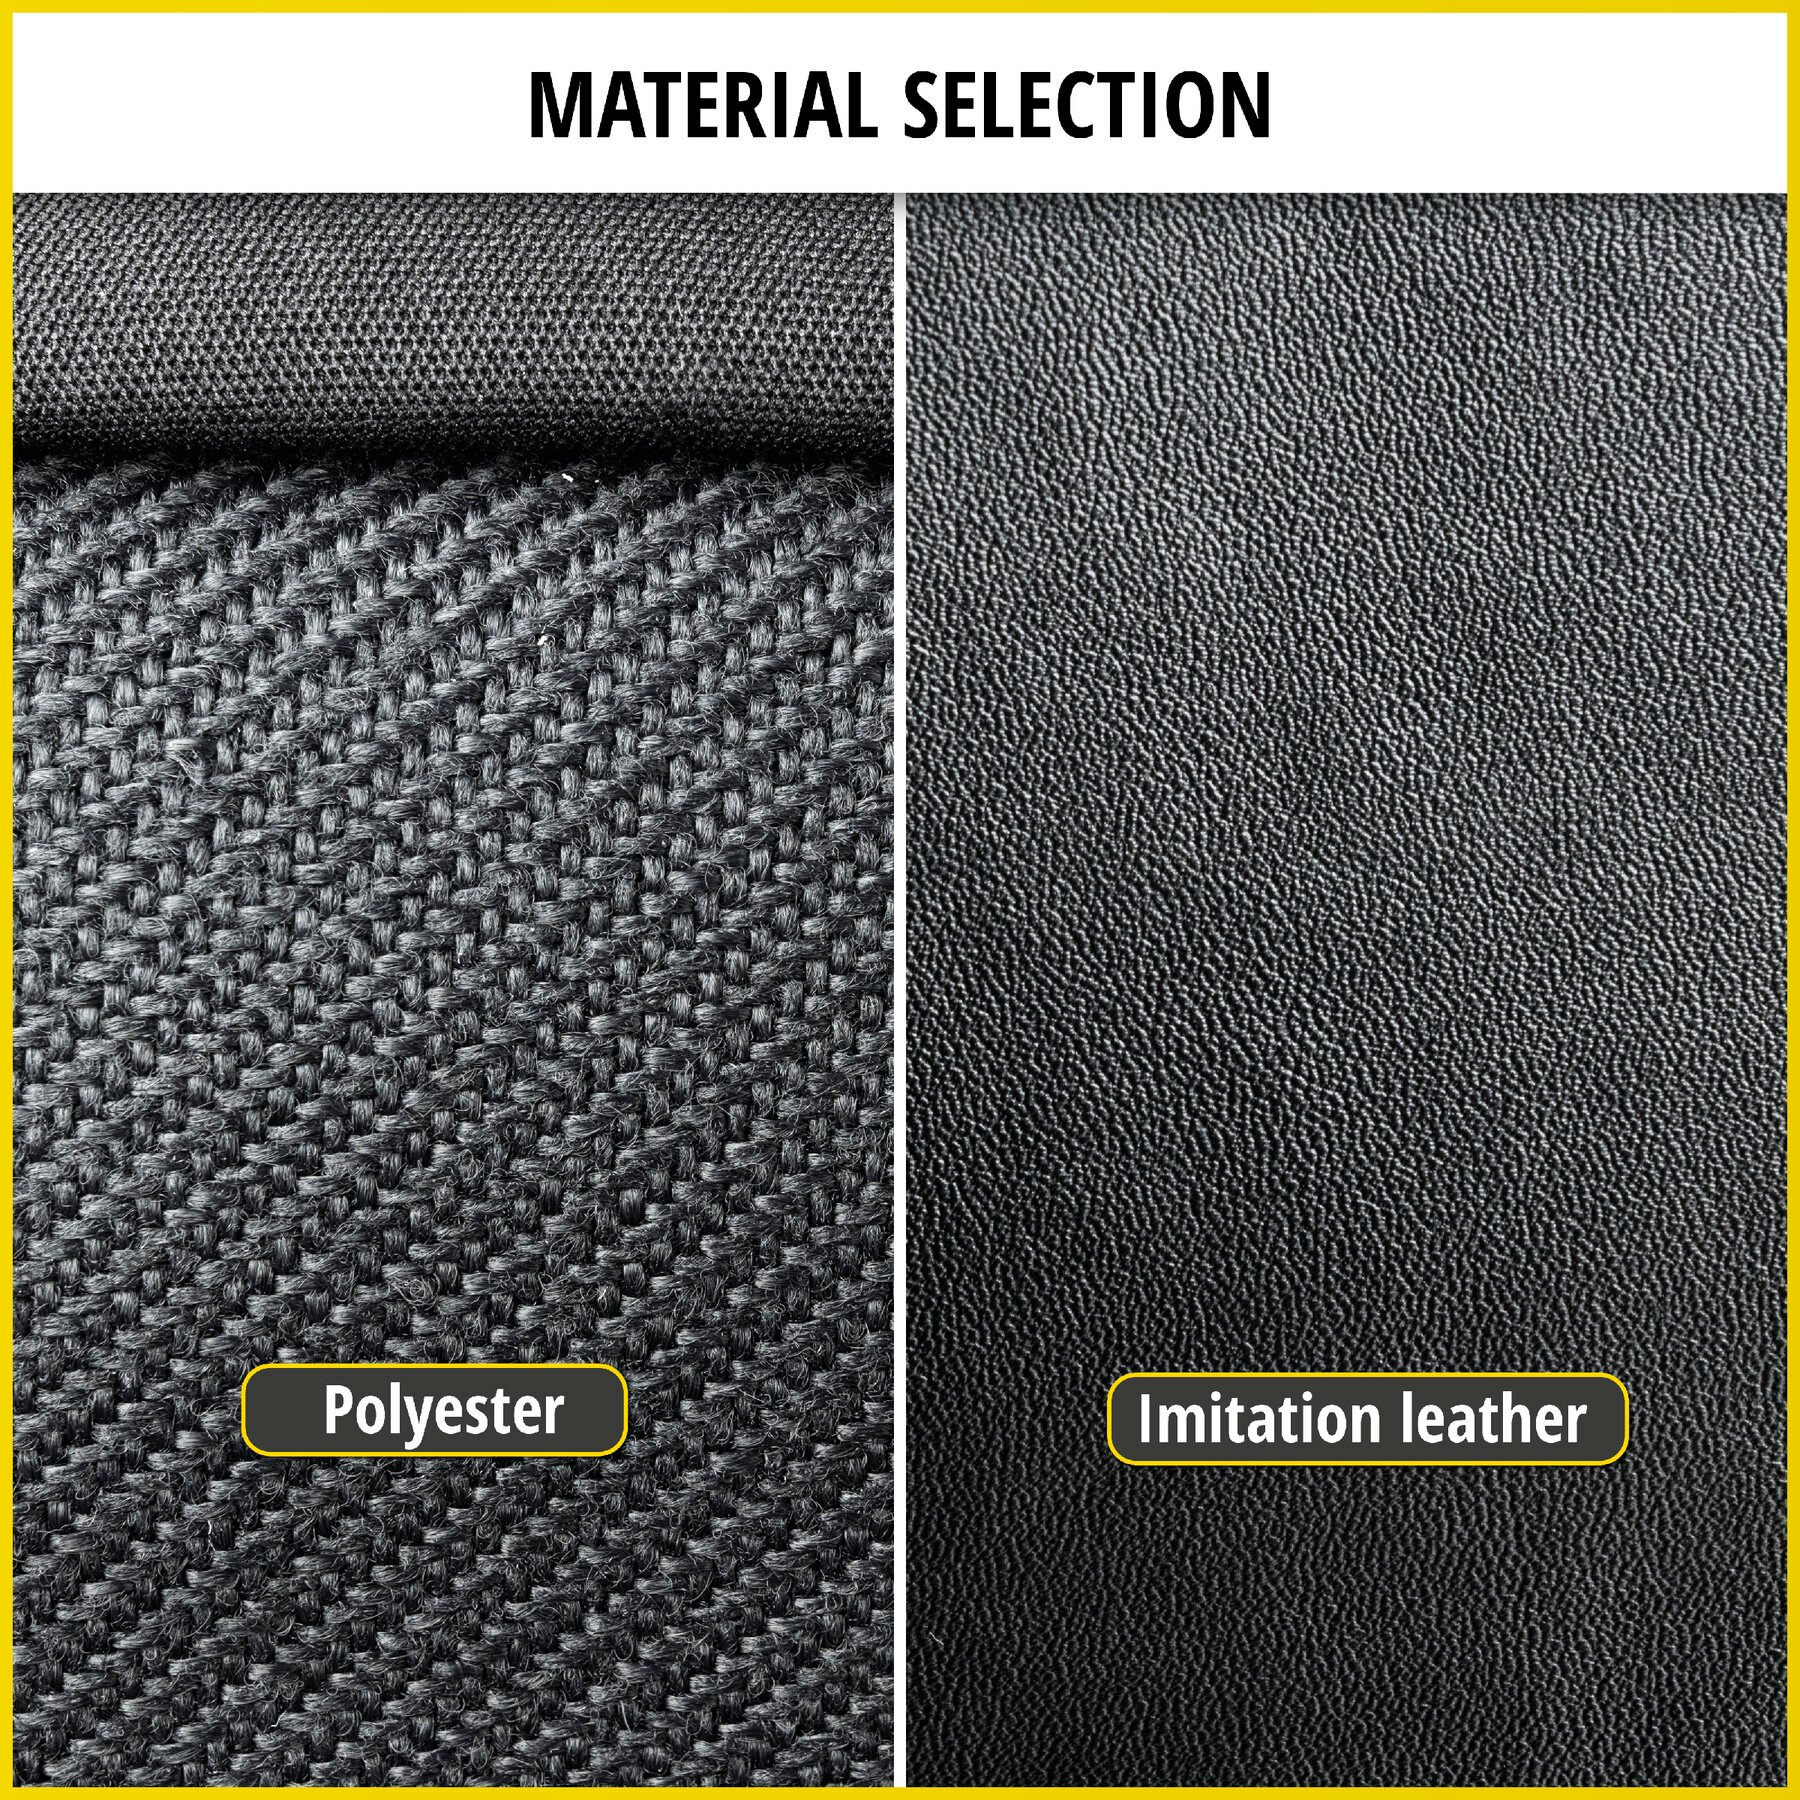 Seat cover made of imitation leather for Opel Movano, Renault Master, Nissan Interstar, single seat cover & 2 single seat covers front